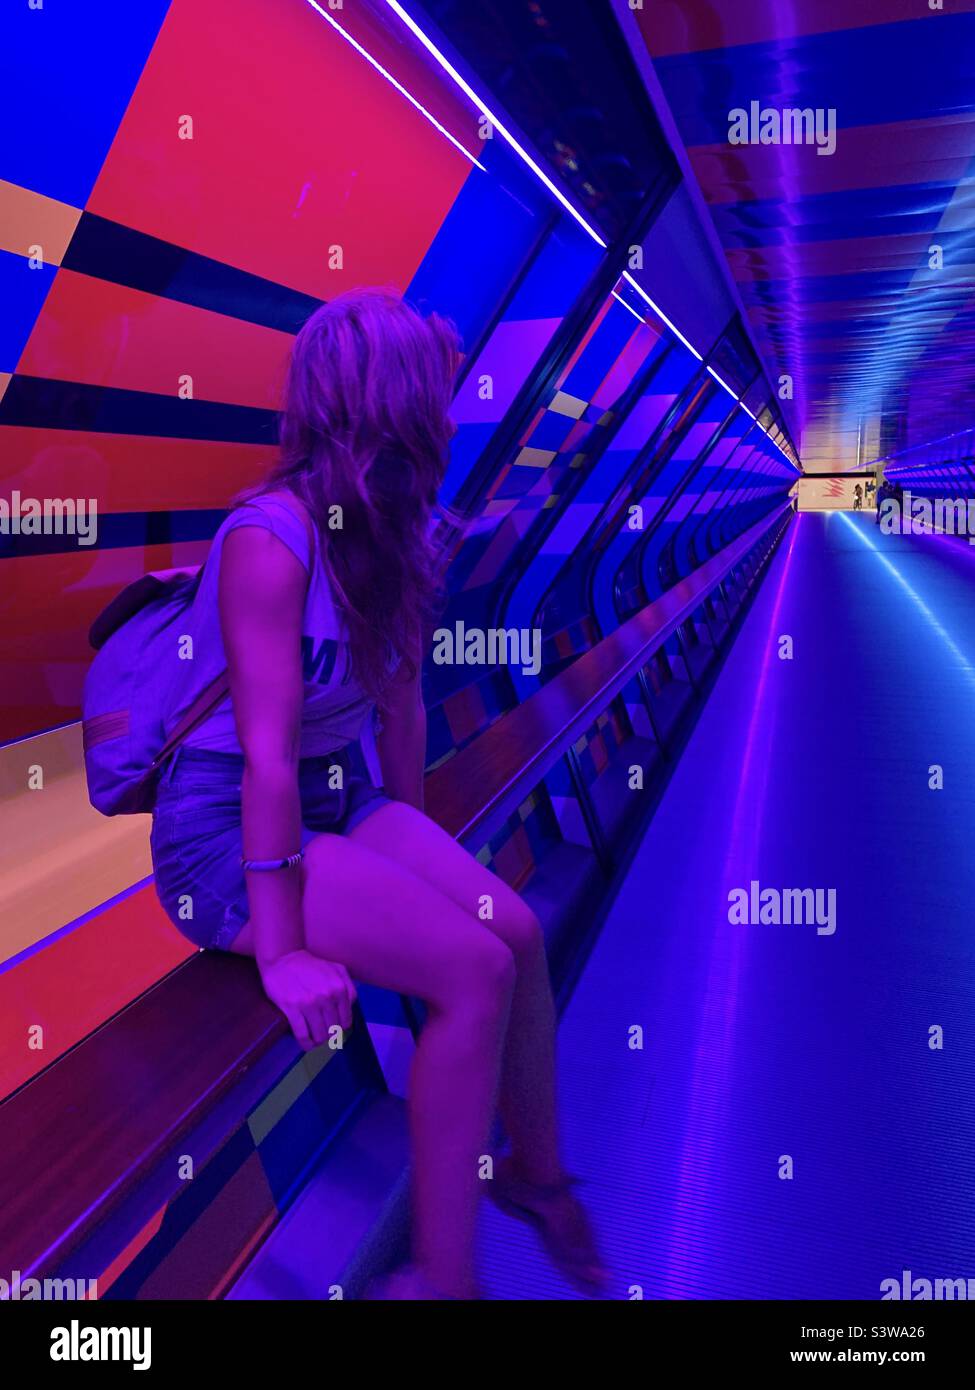 Girl sitting in a colourful tunnel looking towards the exit light Stock Photo